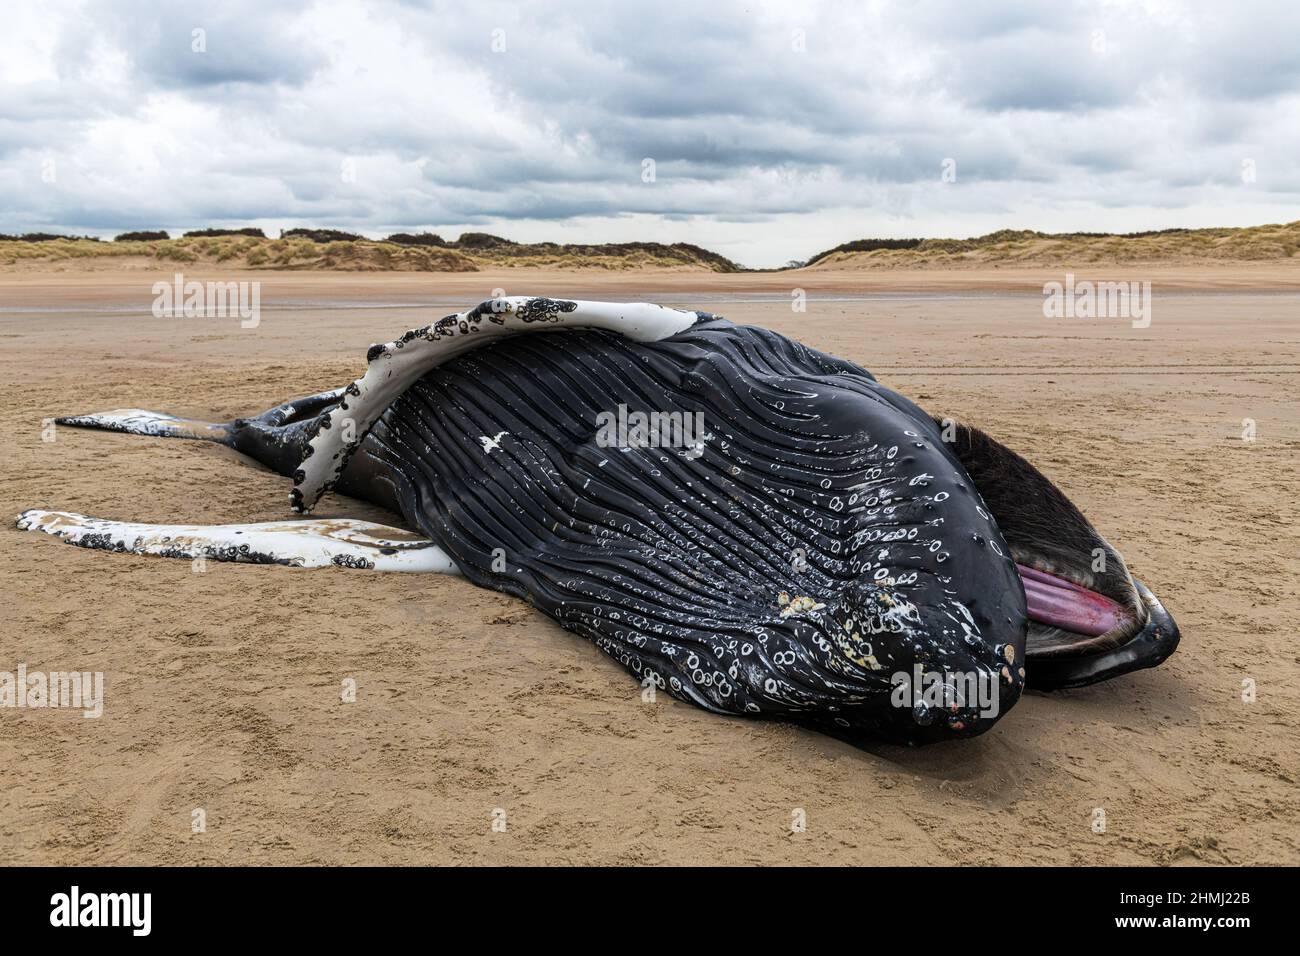 Calais, France, 10 February 2022 A humpback whale stranded on Calais beach. Phenomenon never observed in this region. Credit Yann Avril/Alamy Live News Stock Photo